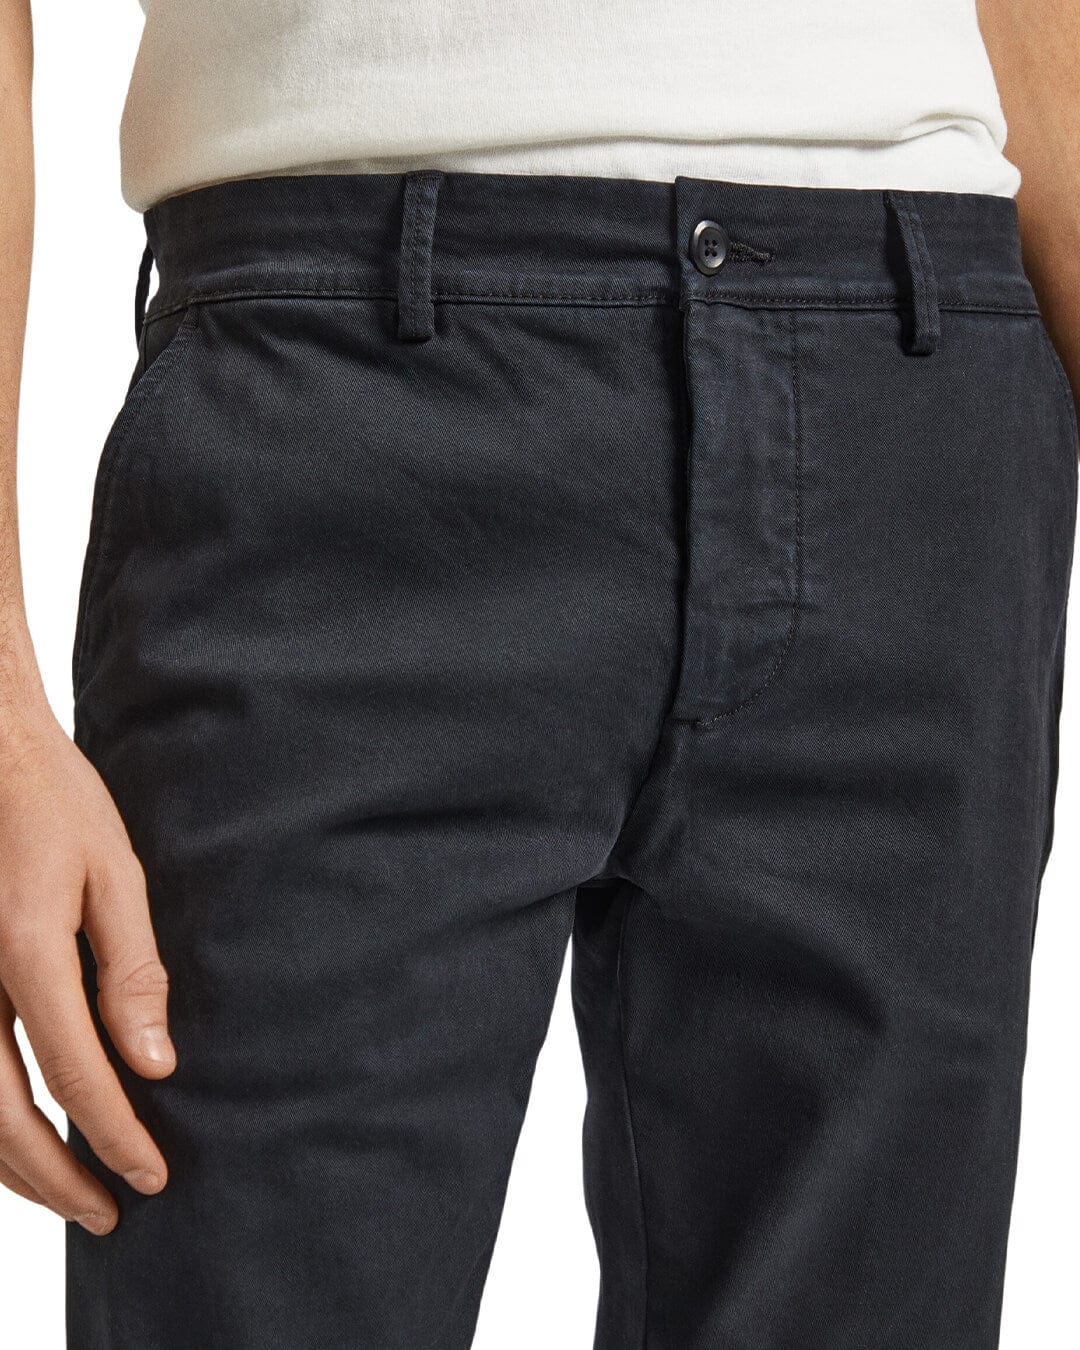 Pepe Jeans Trousers Pepe Jeans Black Slim Fit Twill Chinos